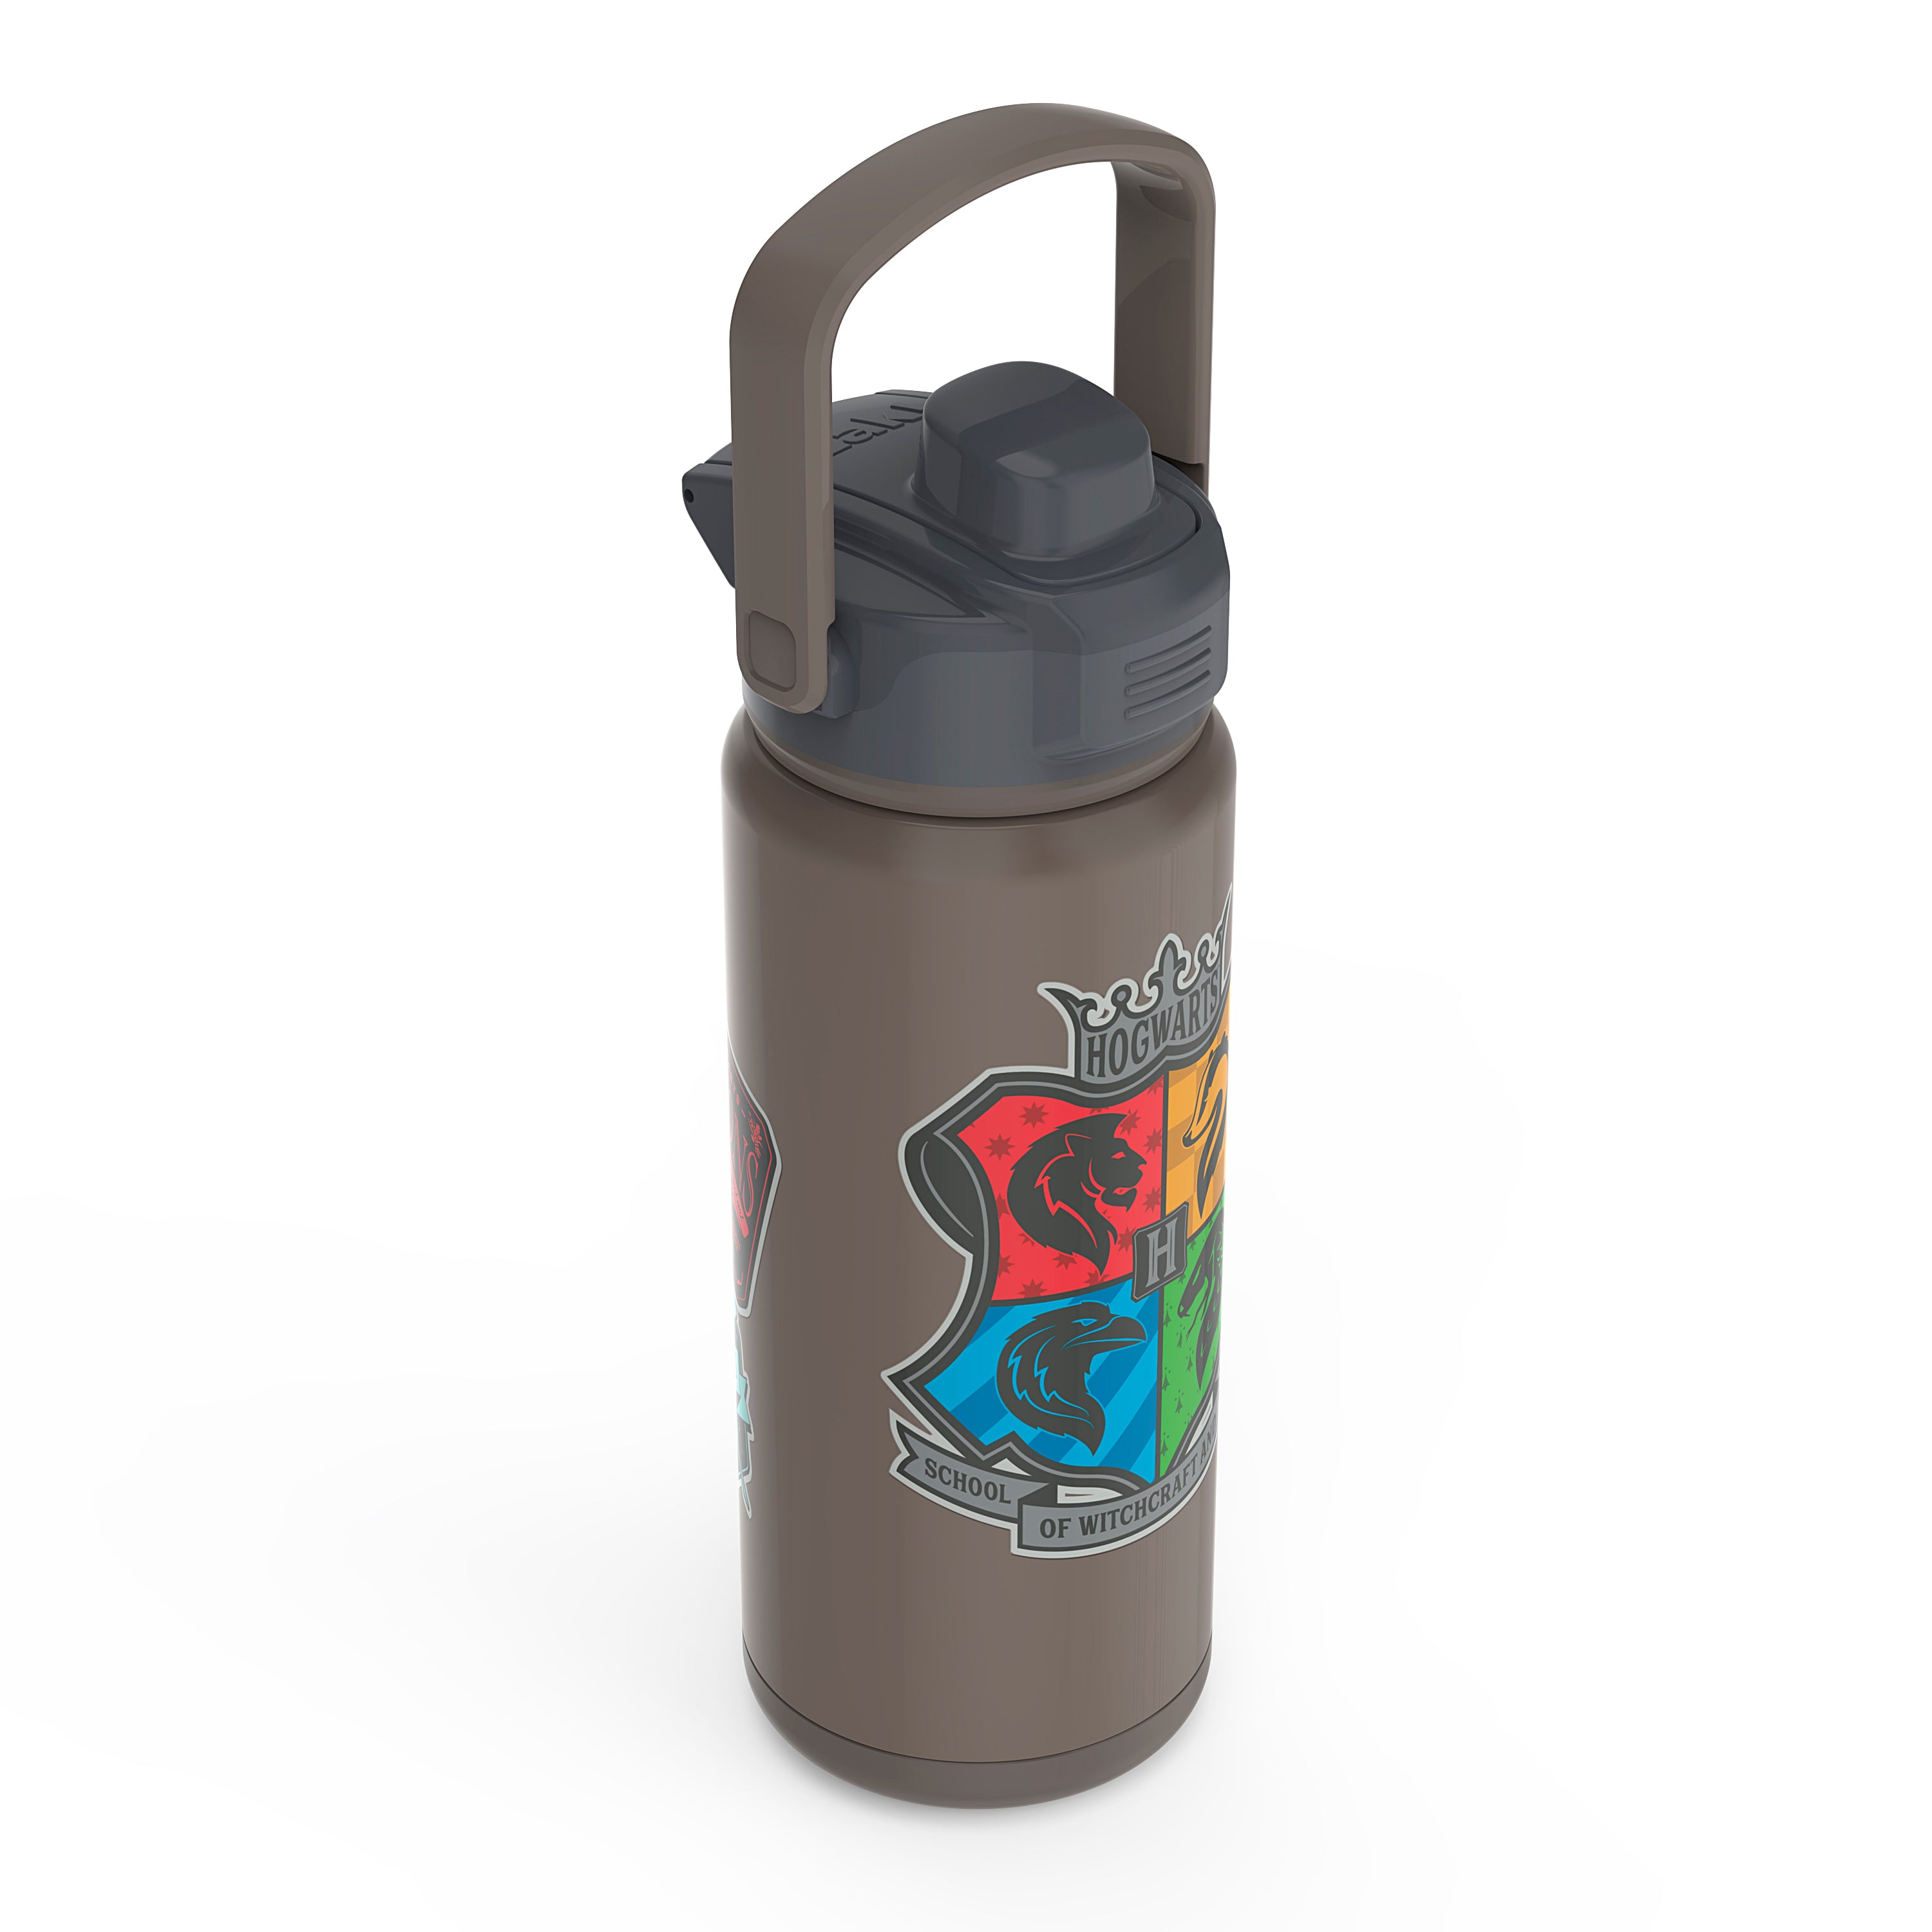 Harry Potter Beacon Stainless Steel Insulated Kids Water Bottle with Covered Spout, 20 Ounces